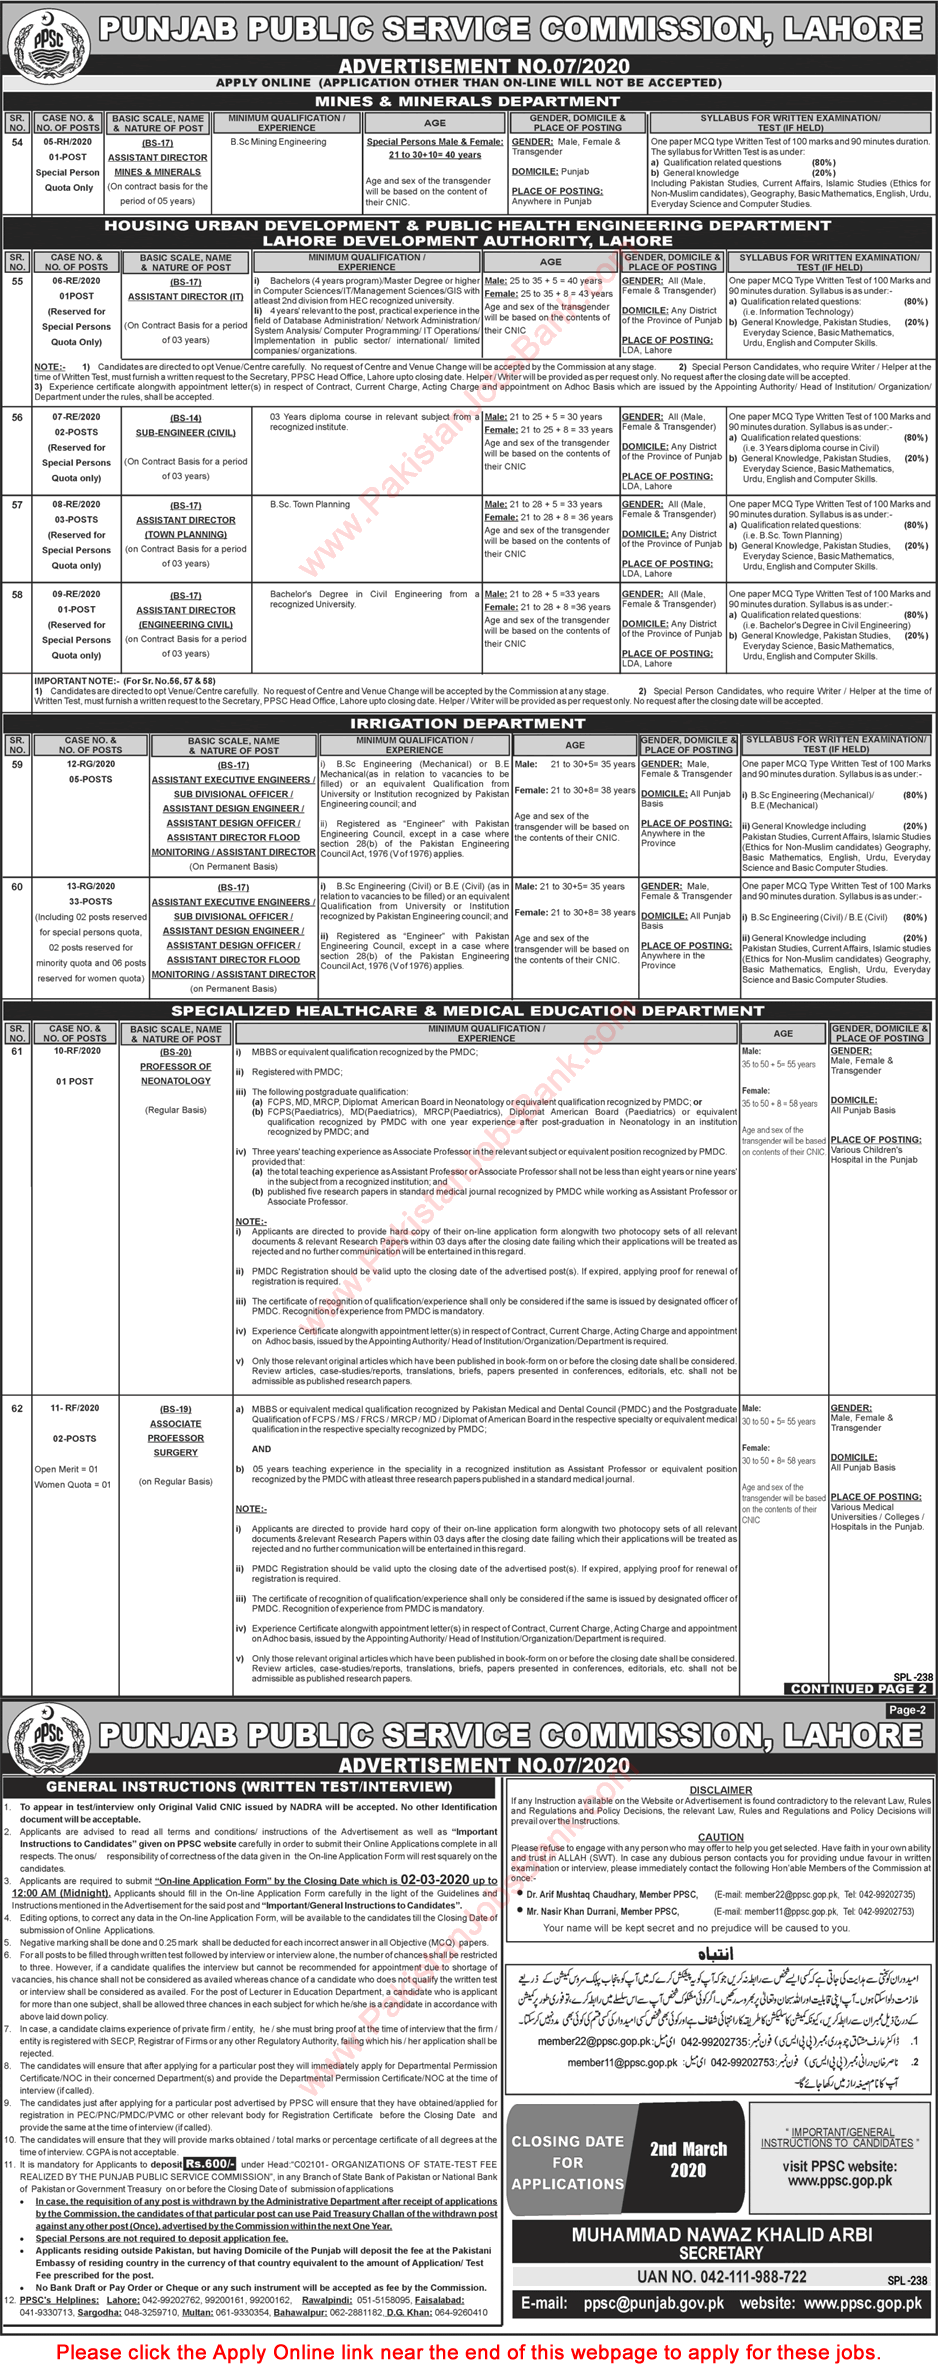 PPSC Jobs February 2020 Apply Online Consolidated Advertisement No 07/2020 7/2020 Latest